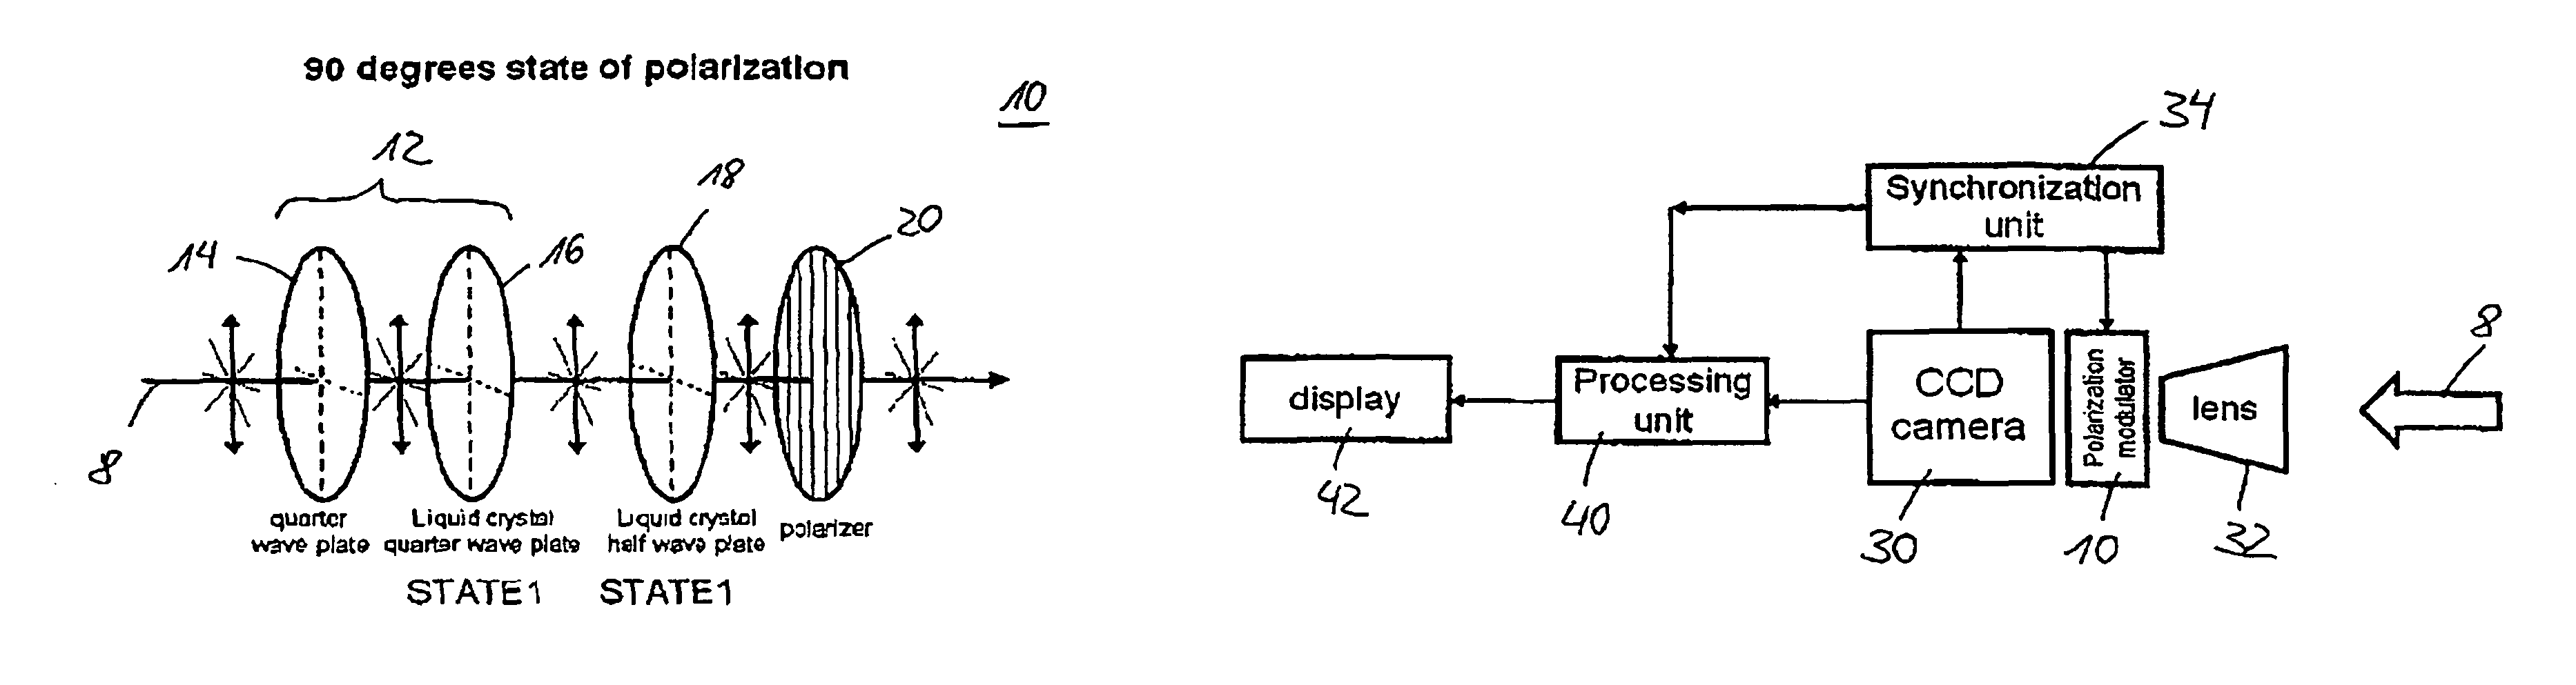 Method and system for stokes polarization imaging